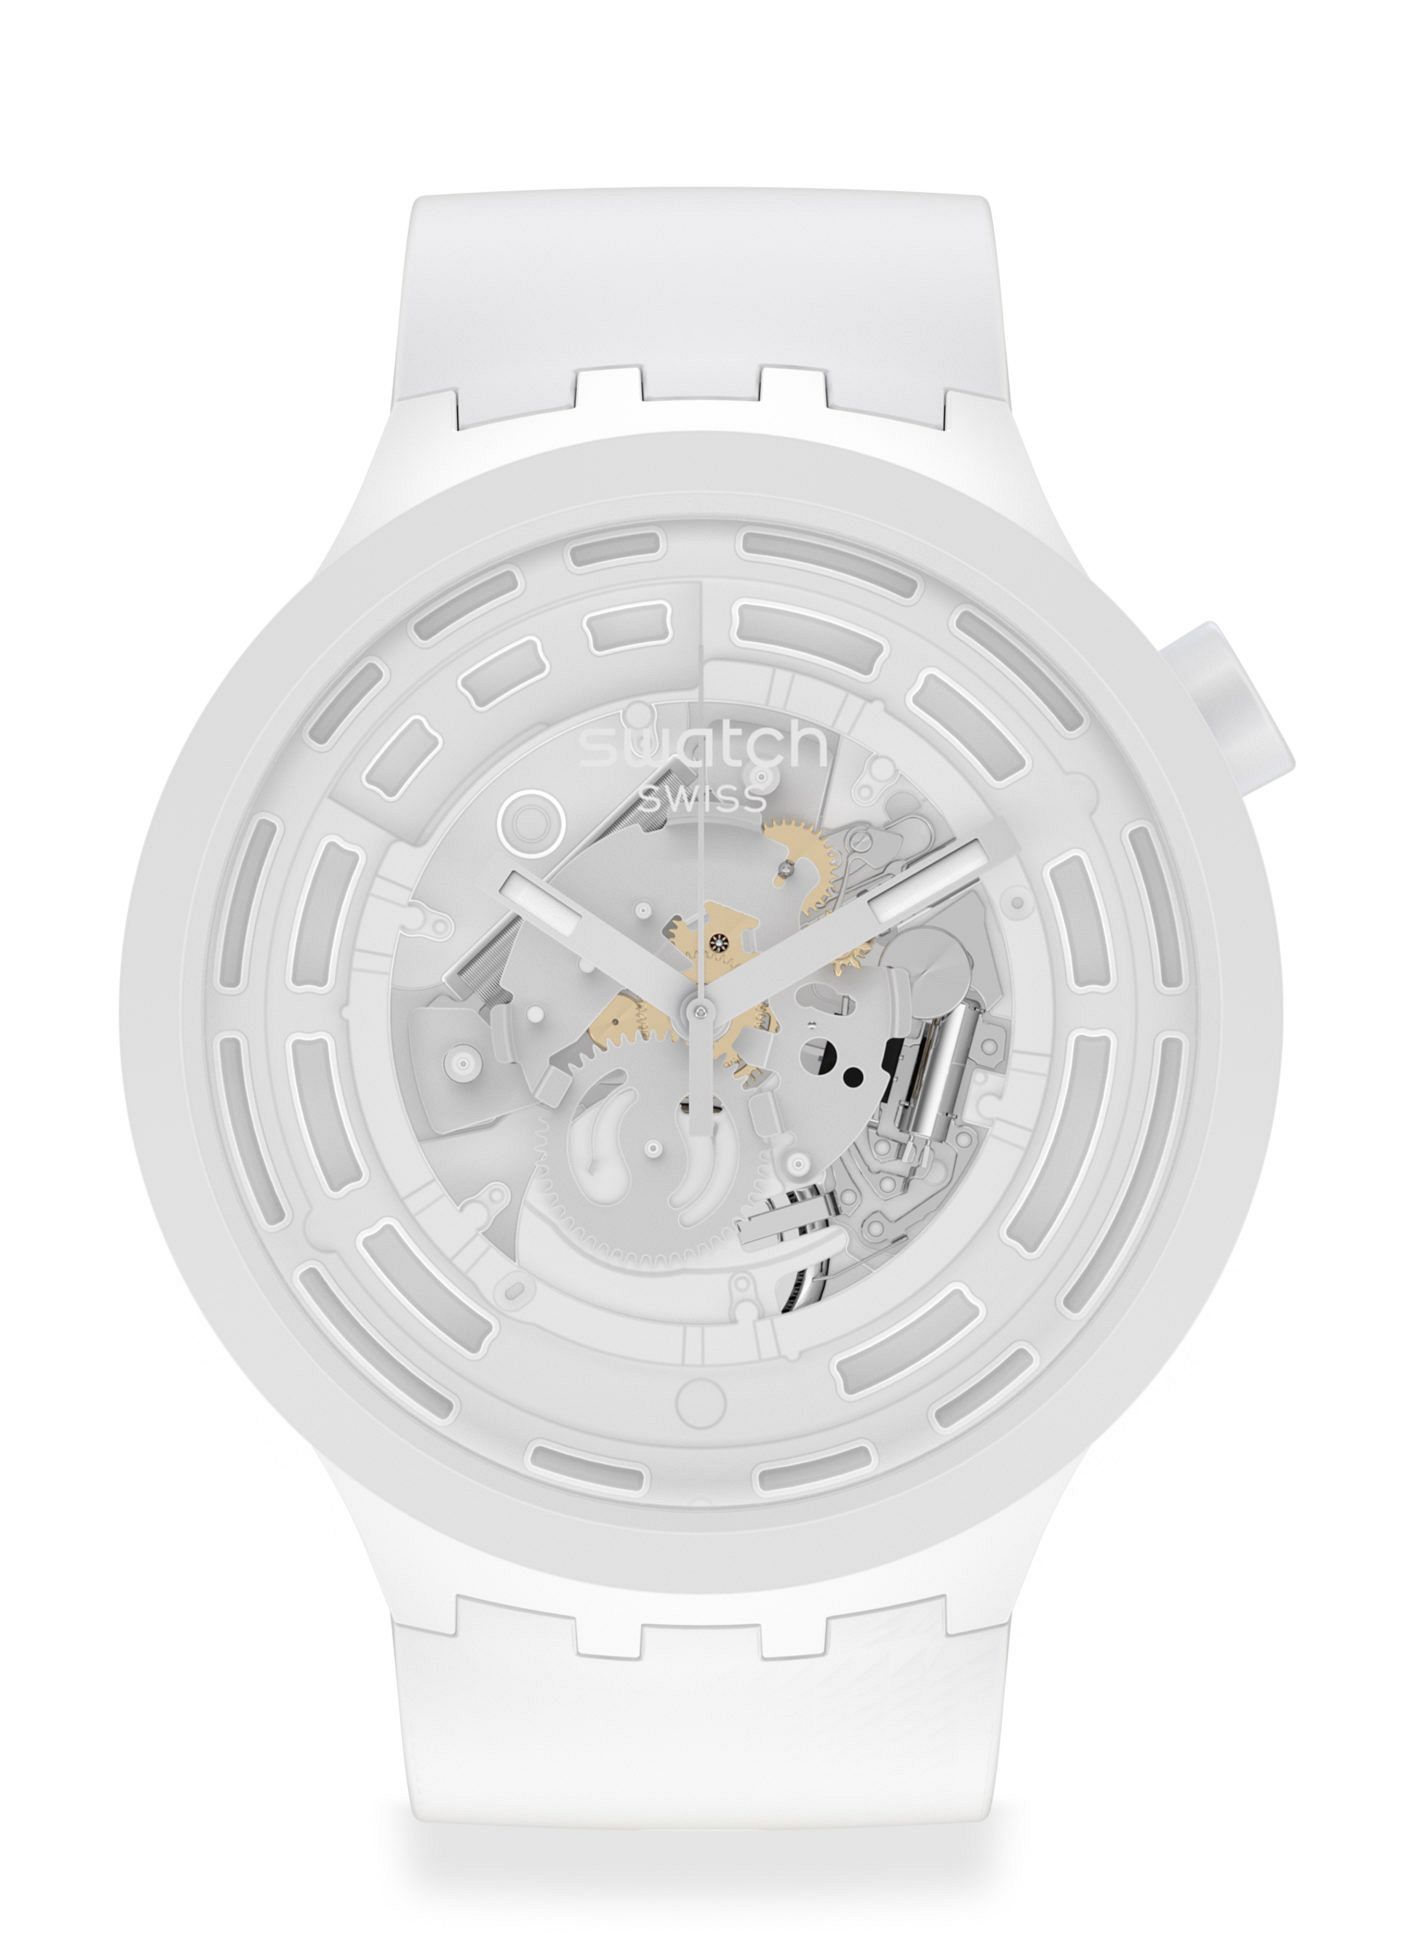 The Swatch Bioceramic C-White is an eco-friendly bargain 